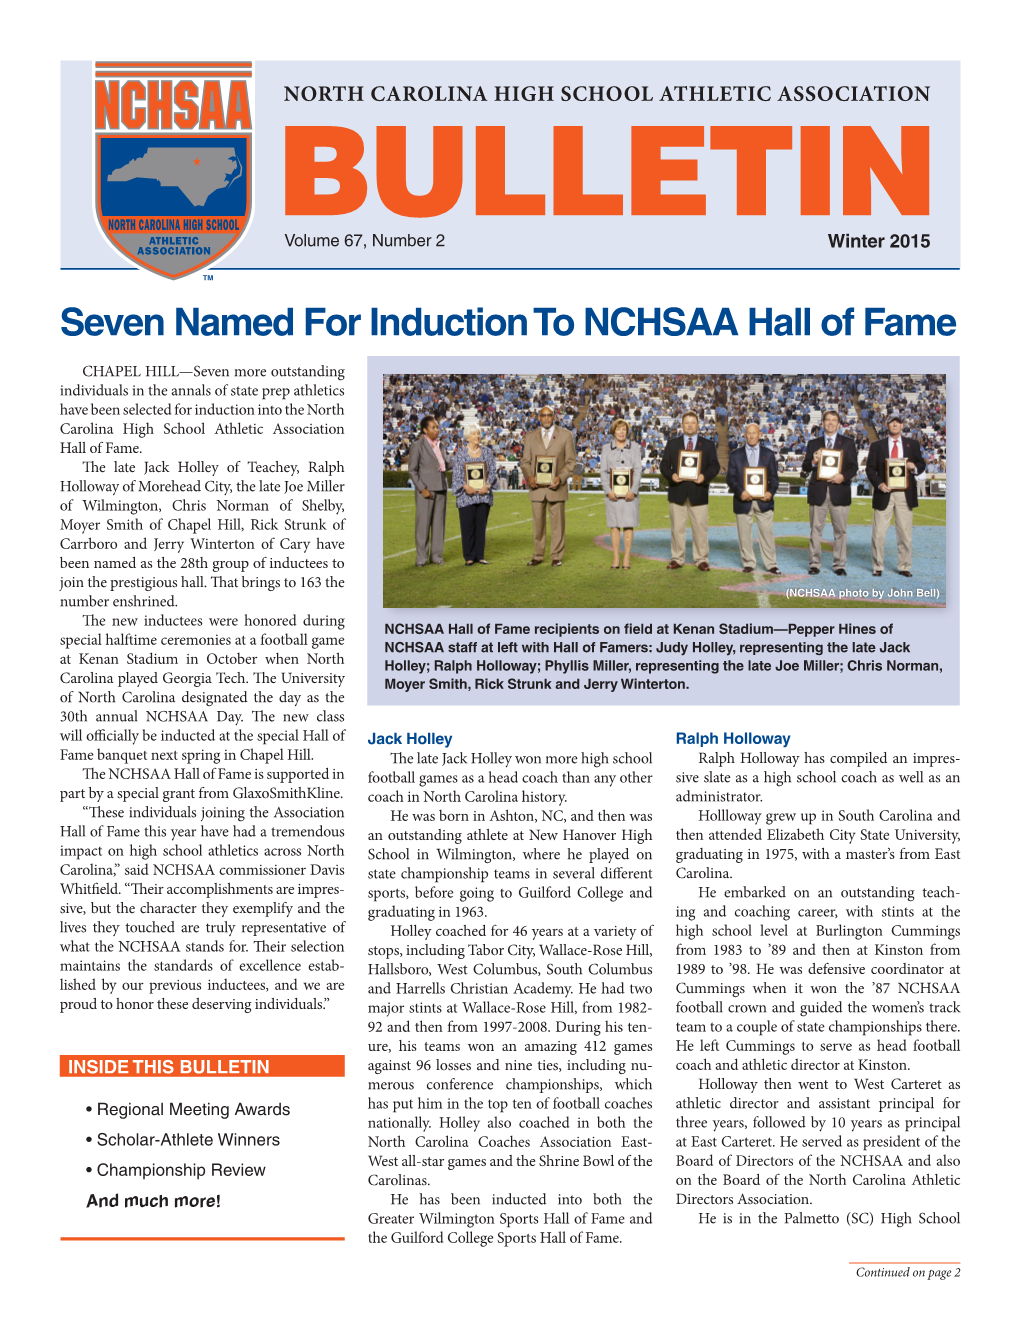 Seven Named for Induction to NCHSAA Hall of Fame